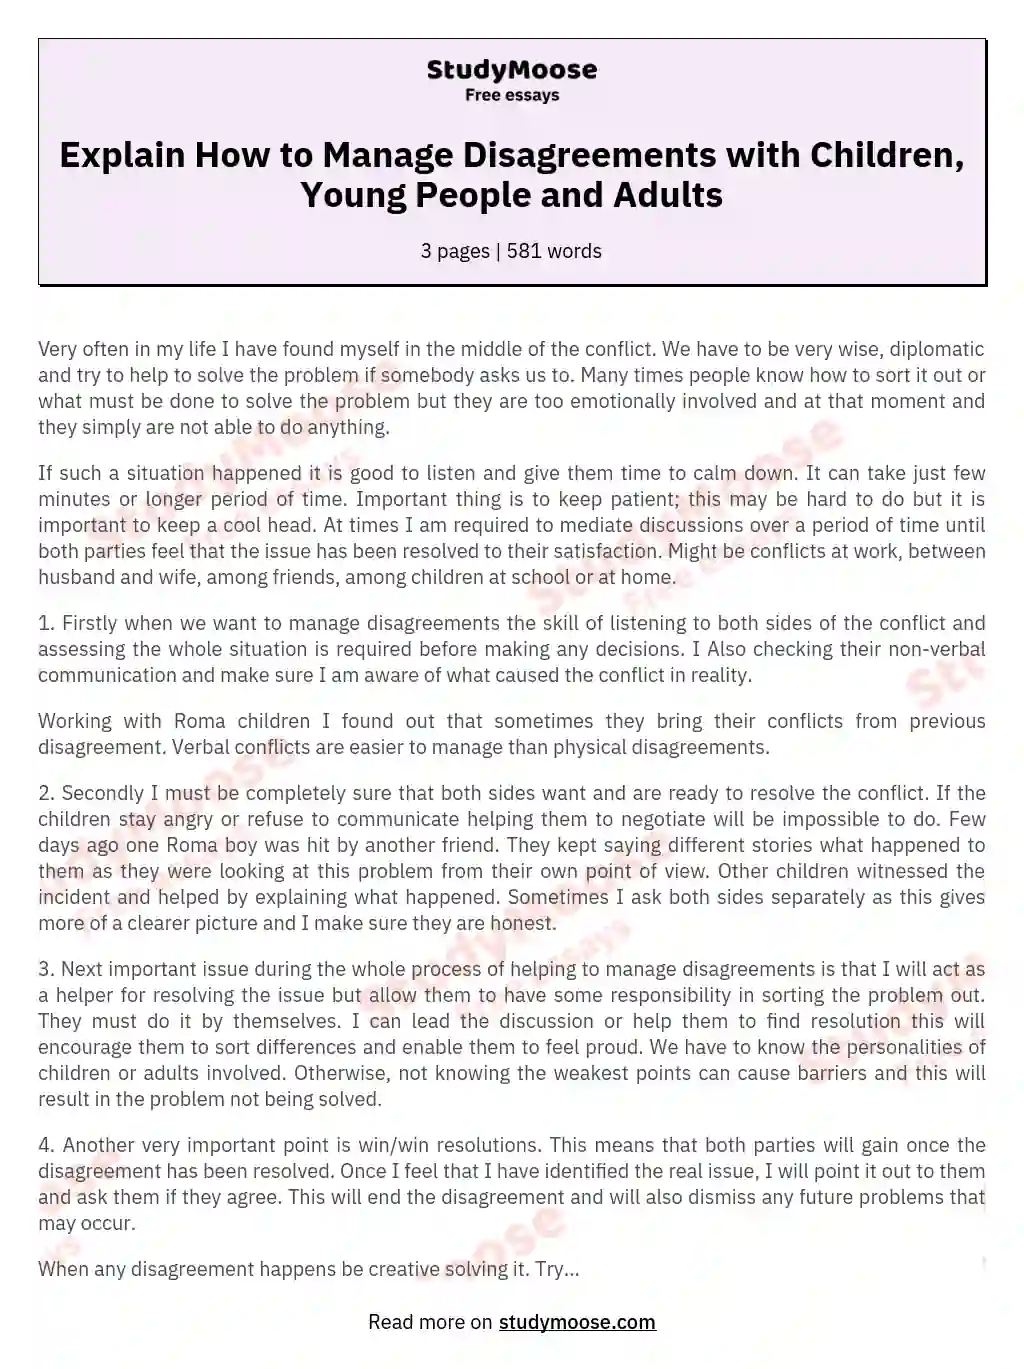 Explain How to Manage Disagreements with Children, Young People and Adults essay